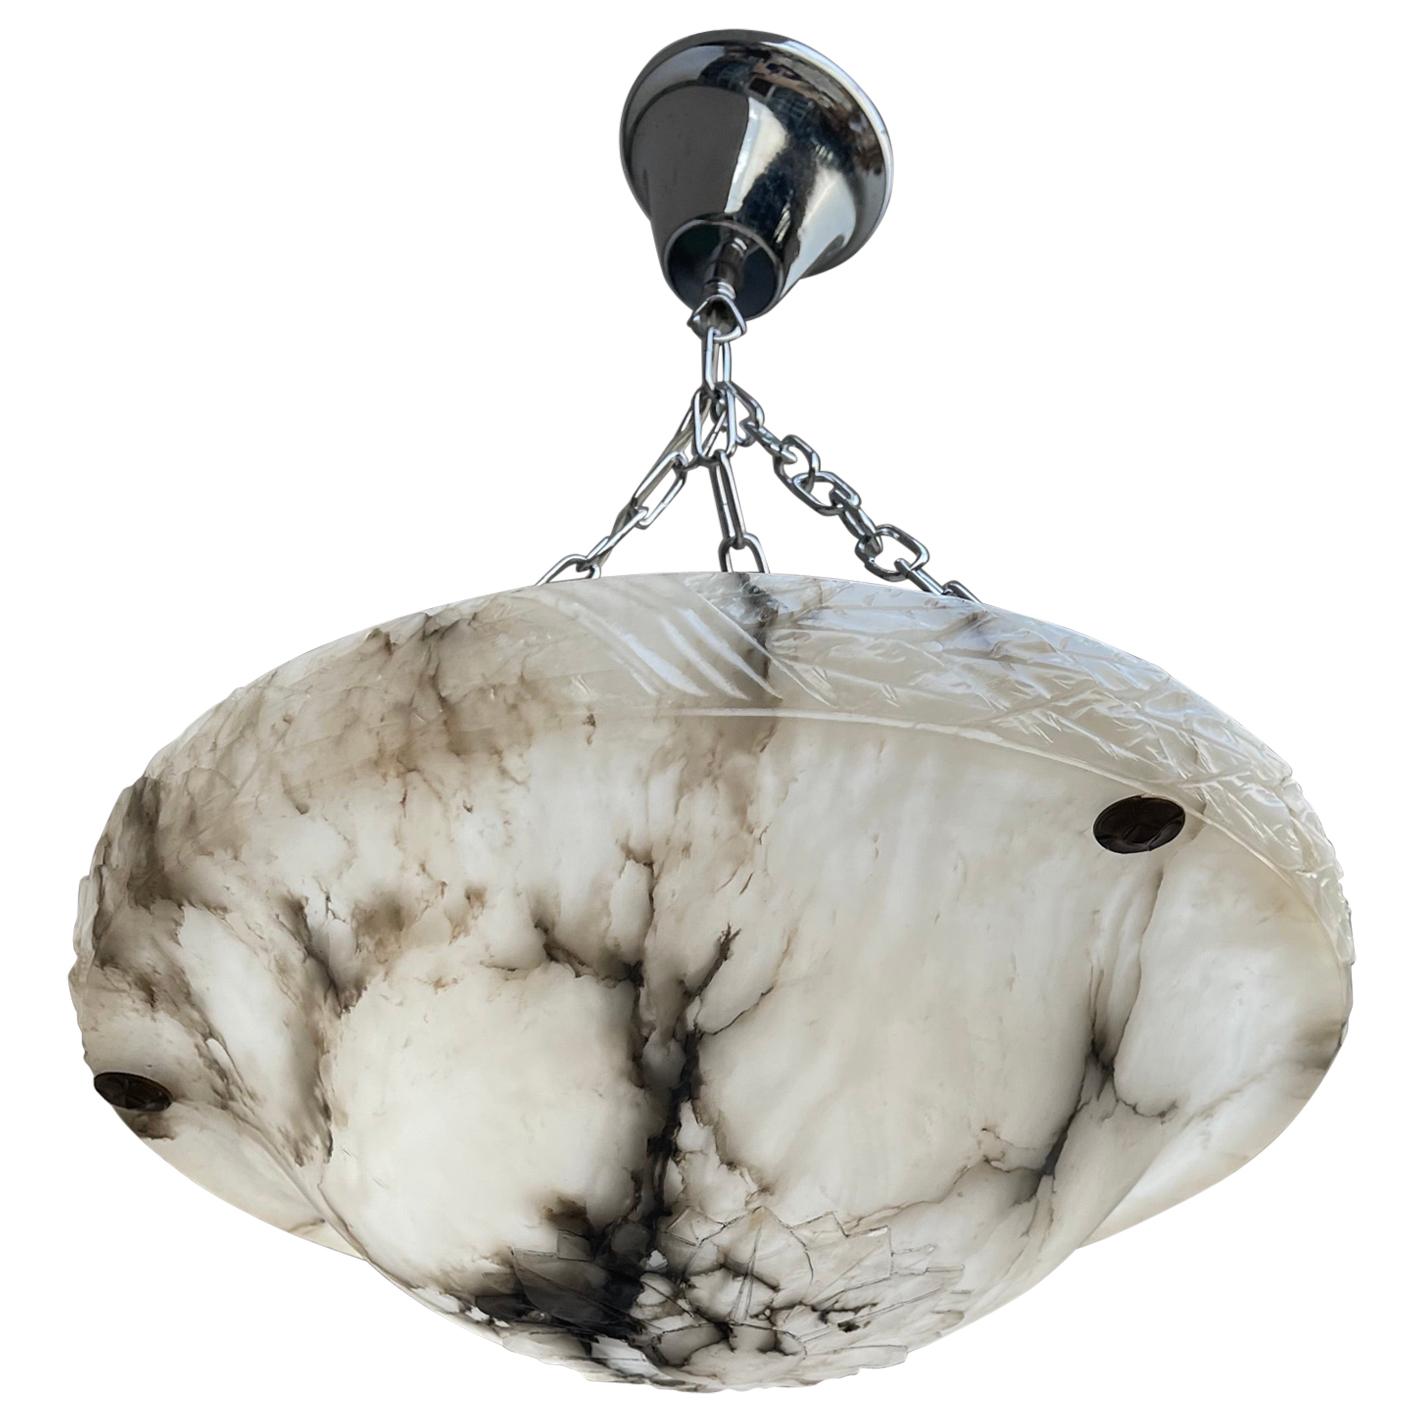 Another beautifully designed, all handcrafted and excellent condition alabaster pendant with metal chain

This practical size alabaster shade pendant really ticks all the boxes. Firstly, the shape of this hand carved alabaster shade is the perfect